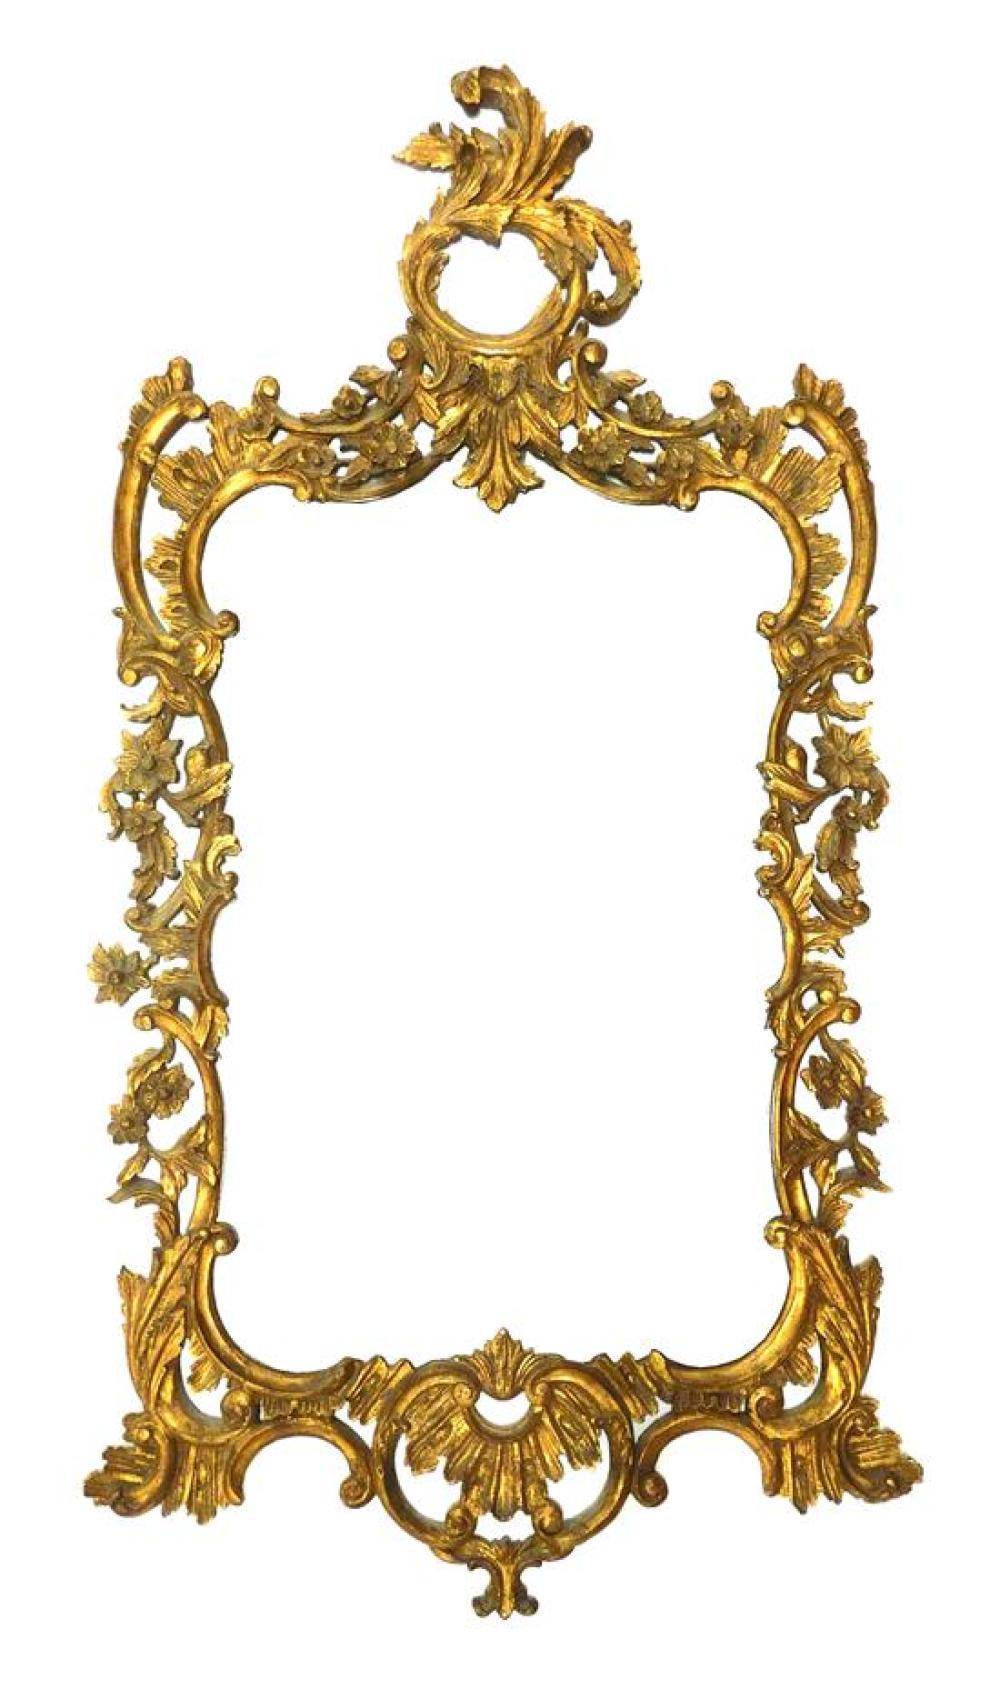 WALL MIRROR ROCOCO STYLE LATE 31bcd7